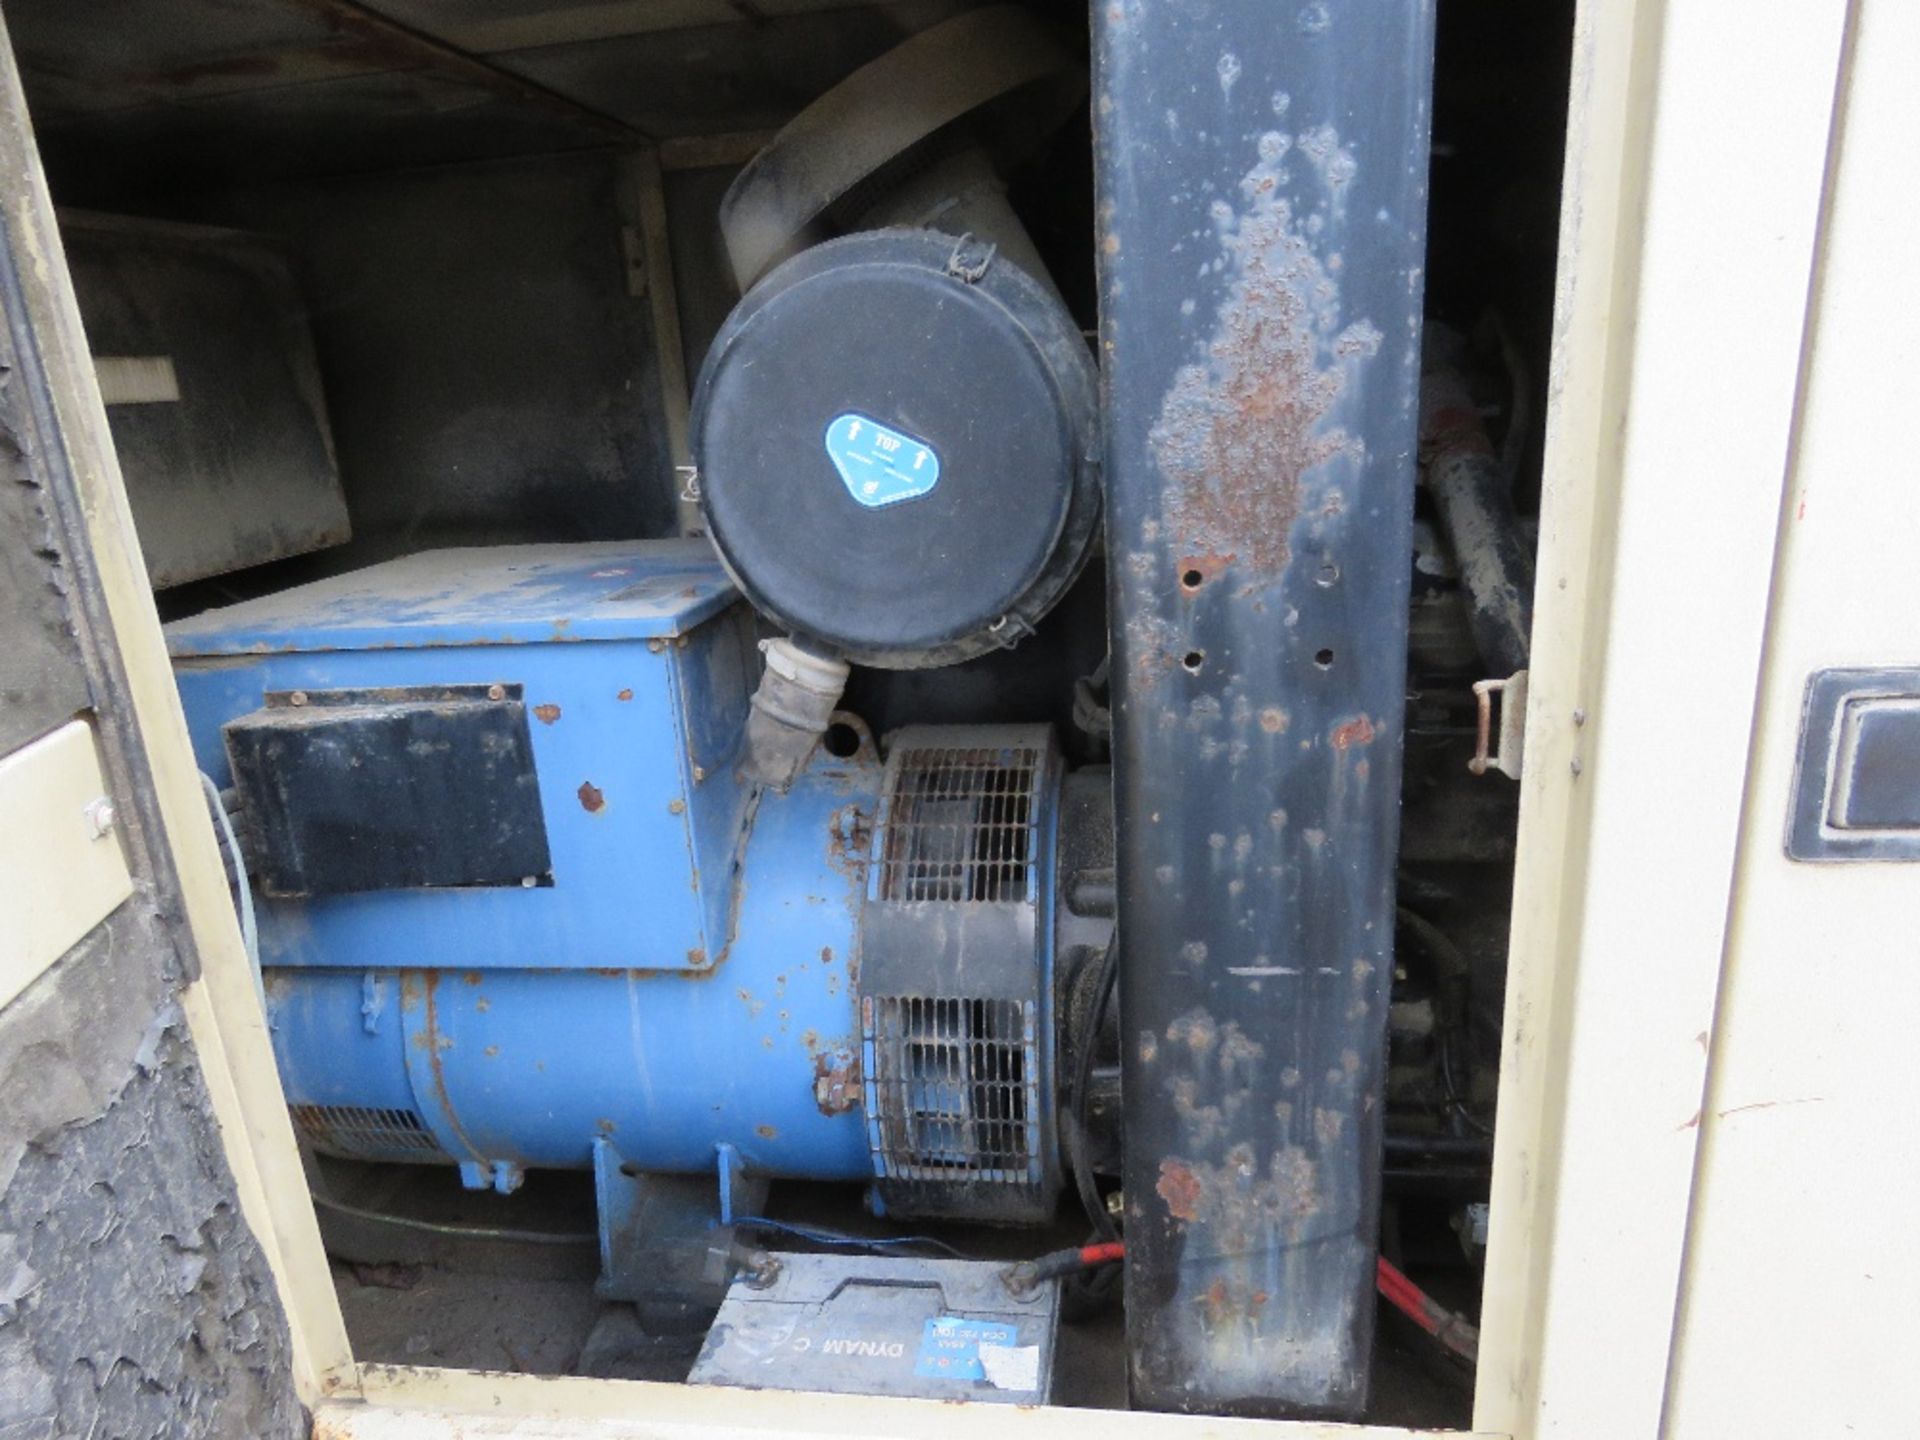 INGERSOLL RAND G200 SKID MOUNTED 200KVA RATED GENERATOR SET WITH JOHN DEERE ENGINE. WHEN TESTED WAS - Image 8 of 9